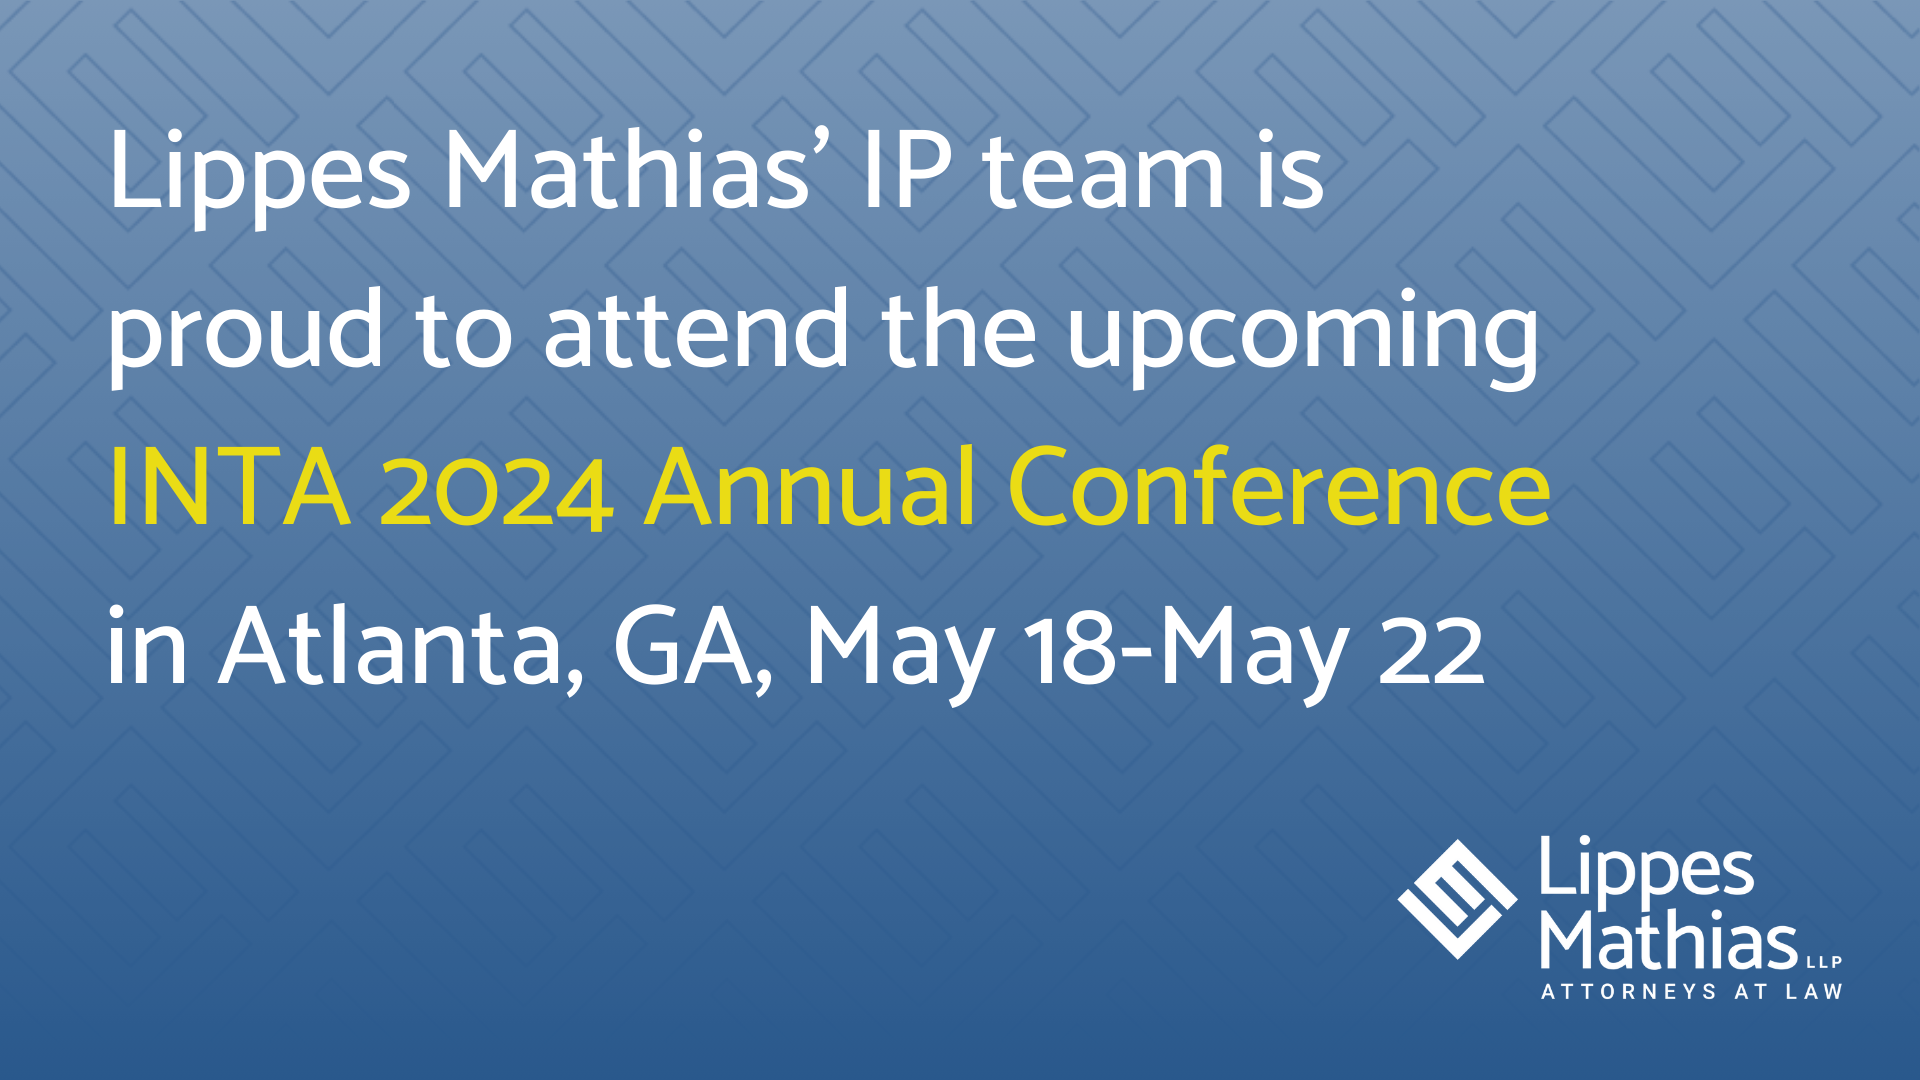 Words Lippes Mathias’ IP team is proud to attend the upcoming INTA 2024 Annual Conference in Atlanta, GA, May 18-May 22